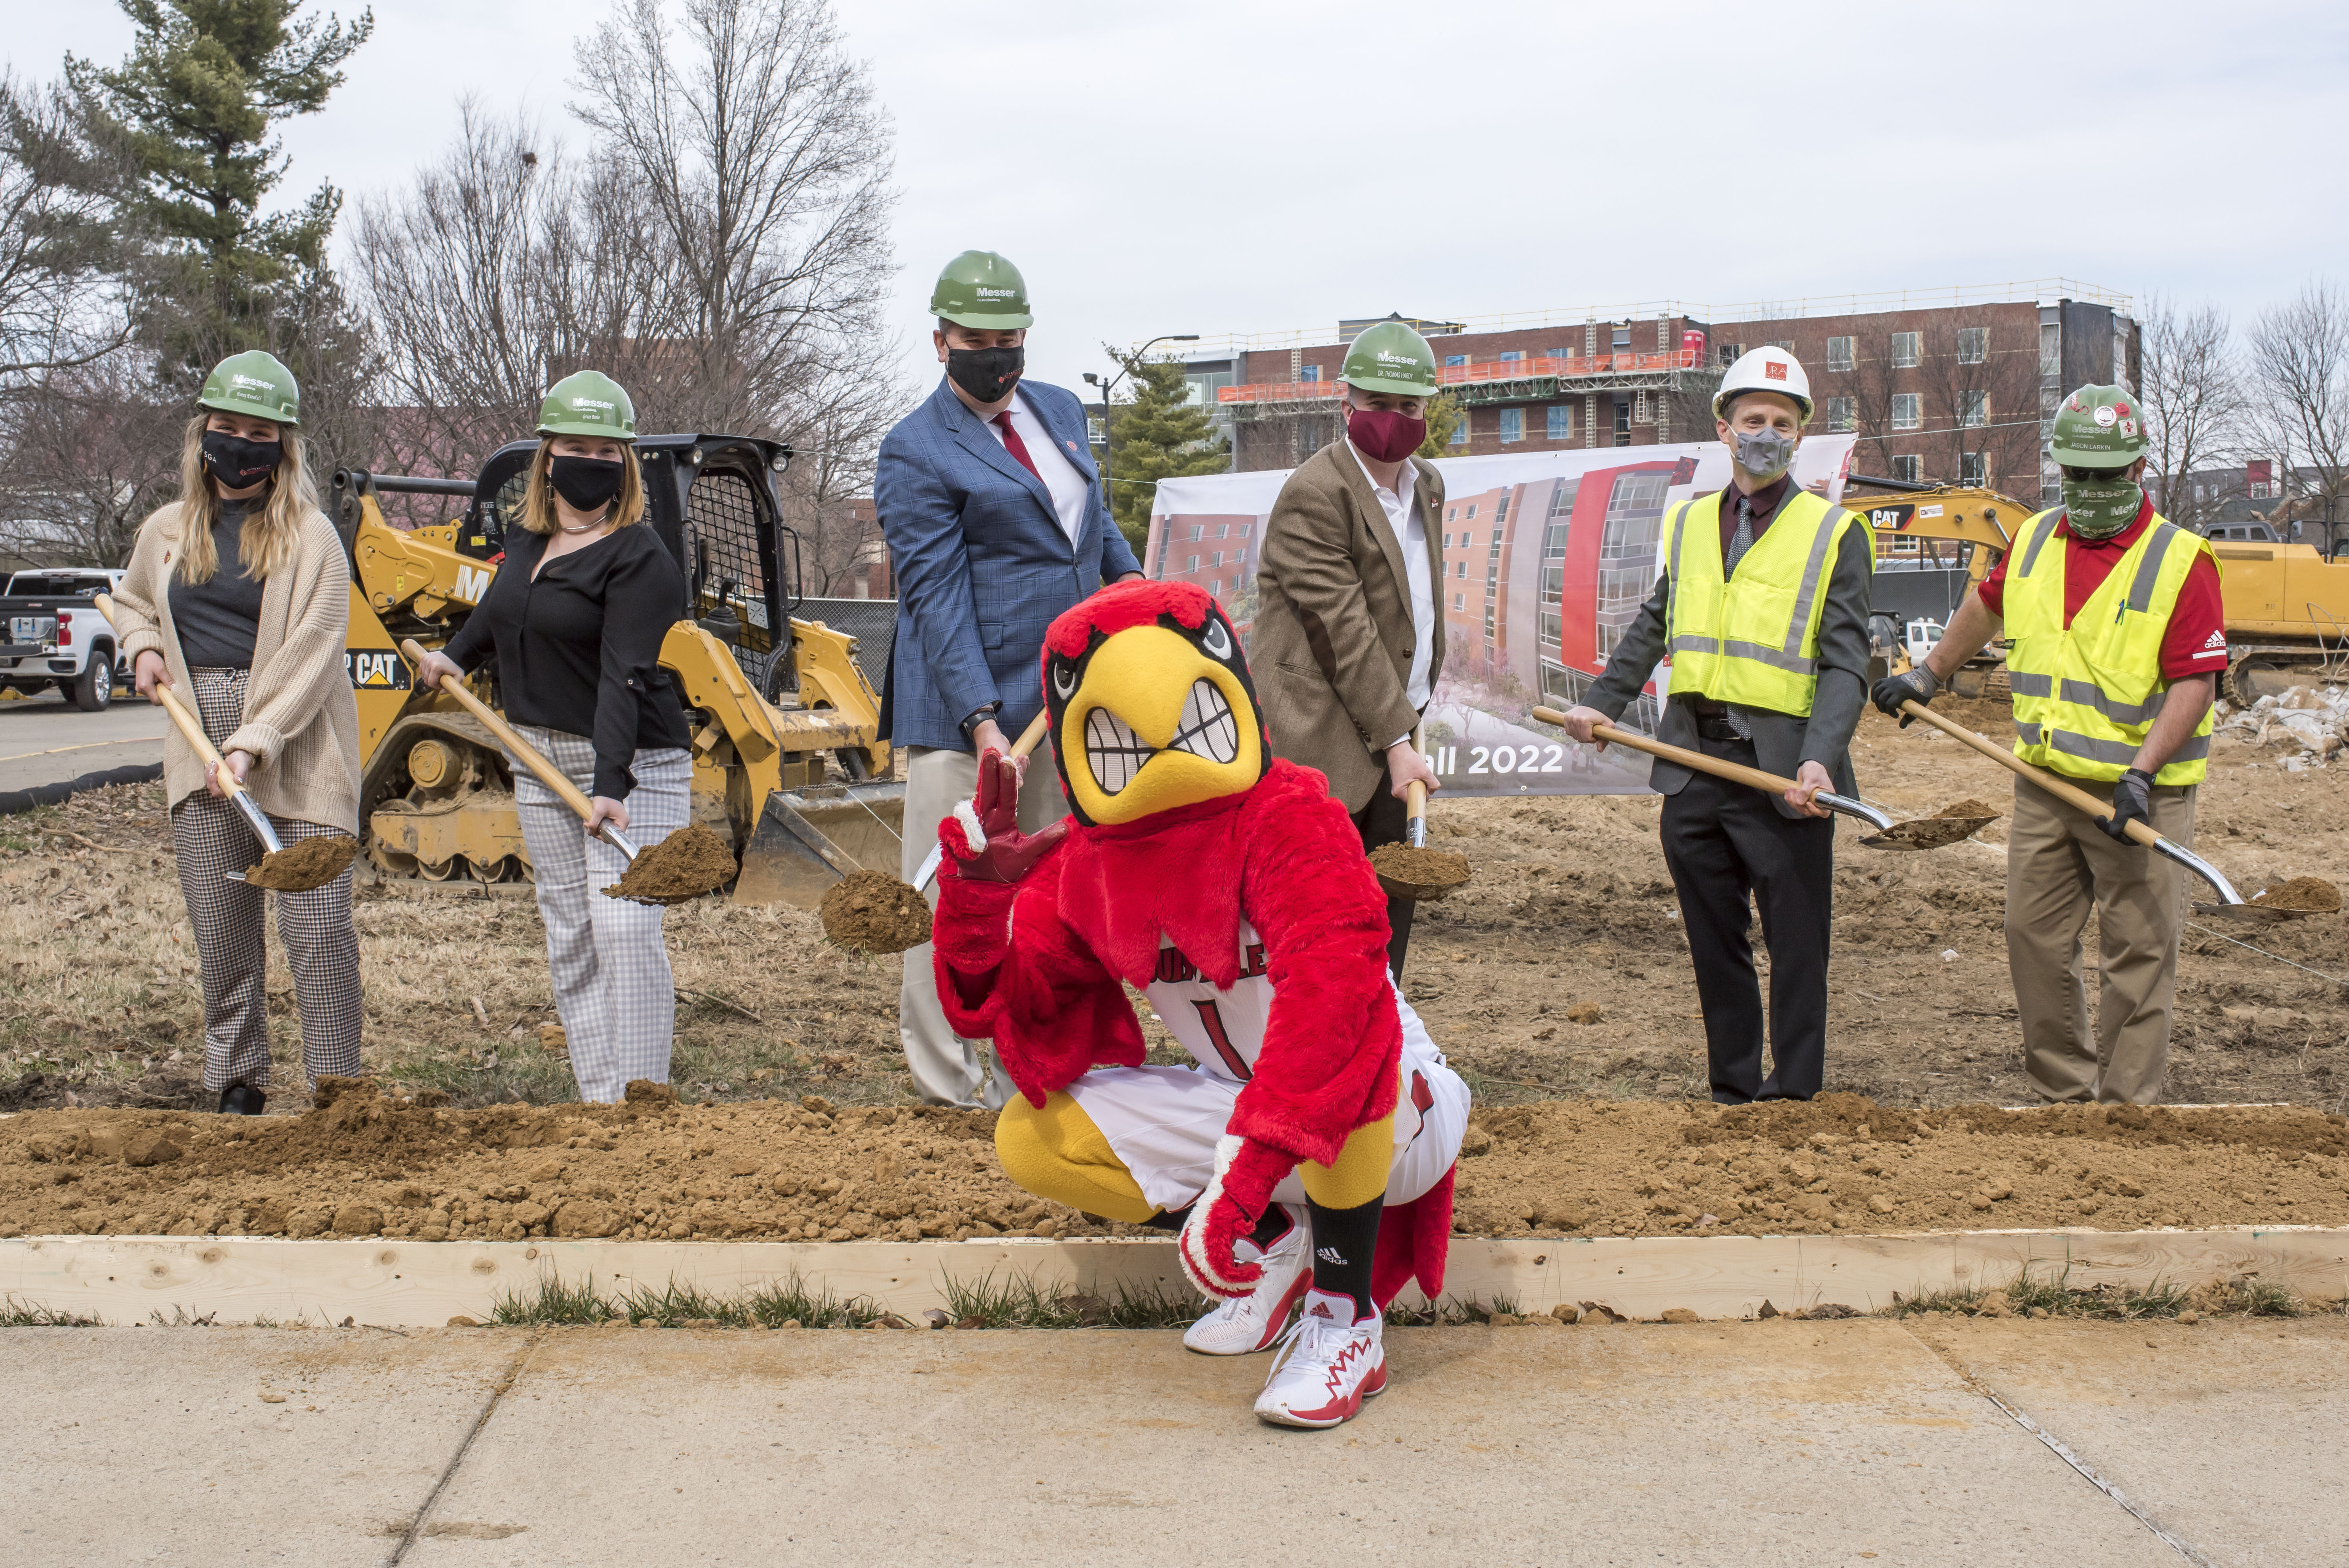 The University of Louisville’s transformation of Belknap Campus continued March 9 with the groundbreaking ceremony for the latest state-of-the-art residence hall.